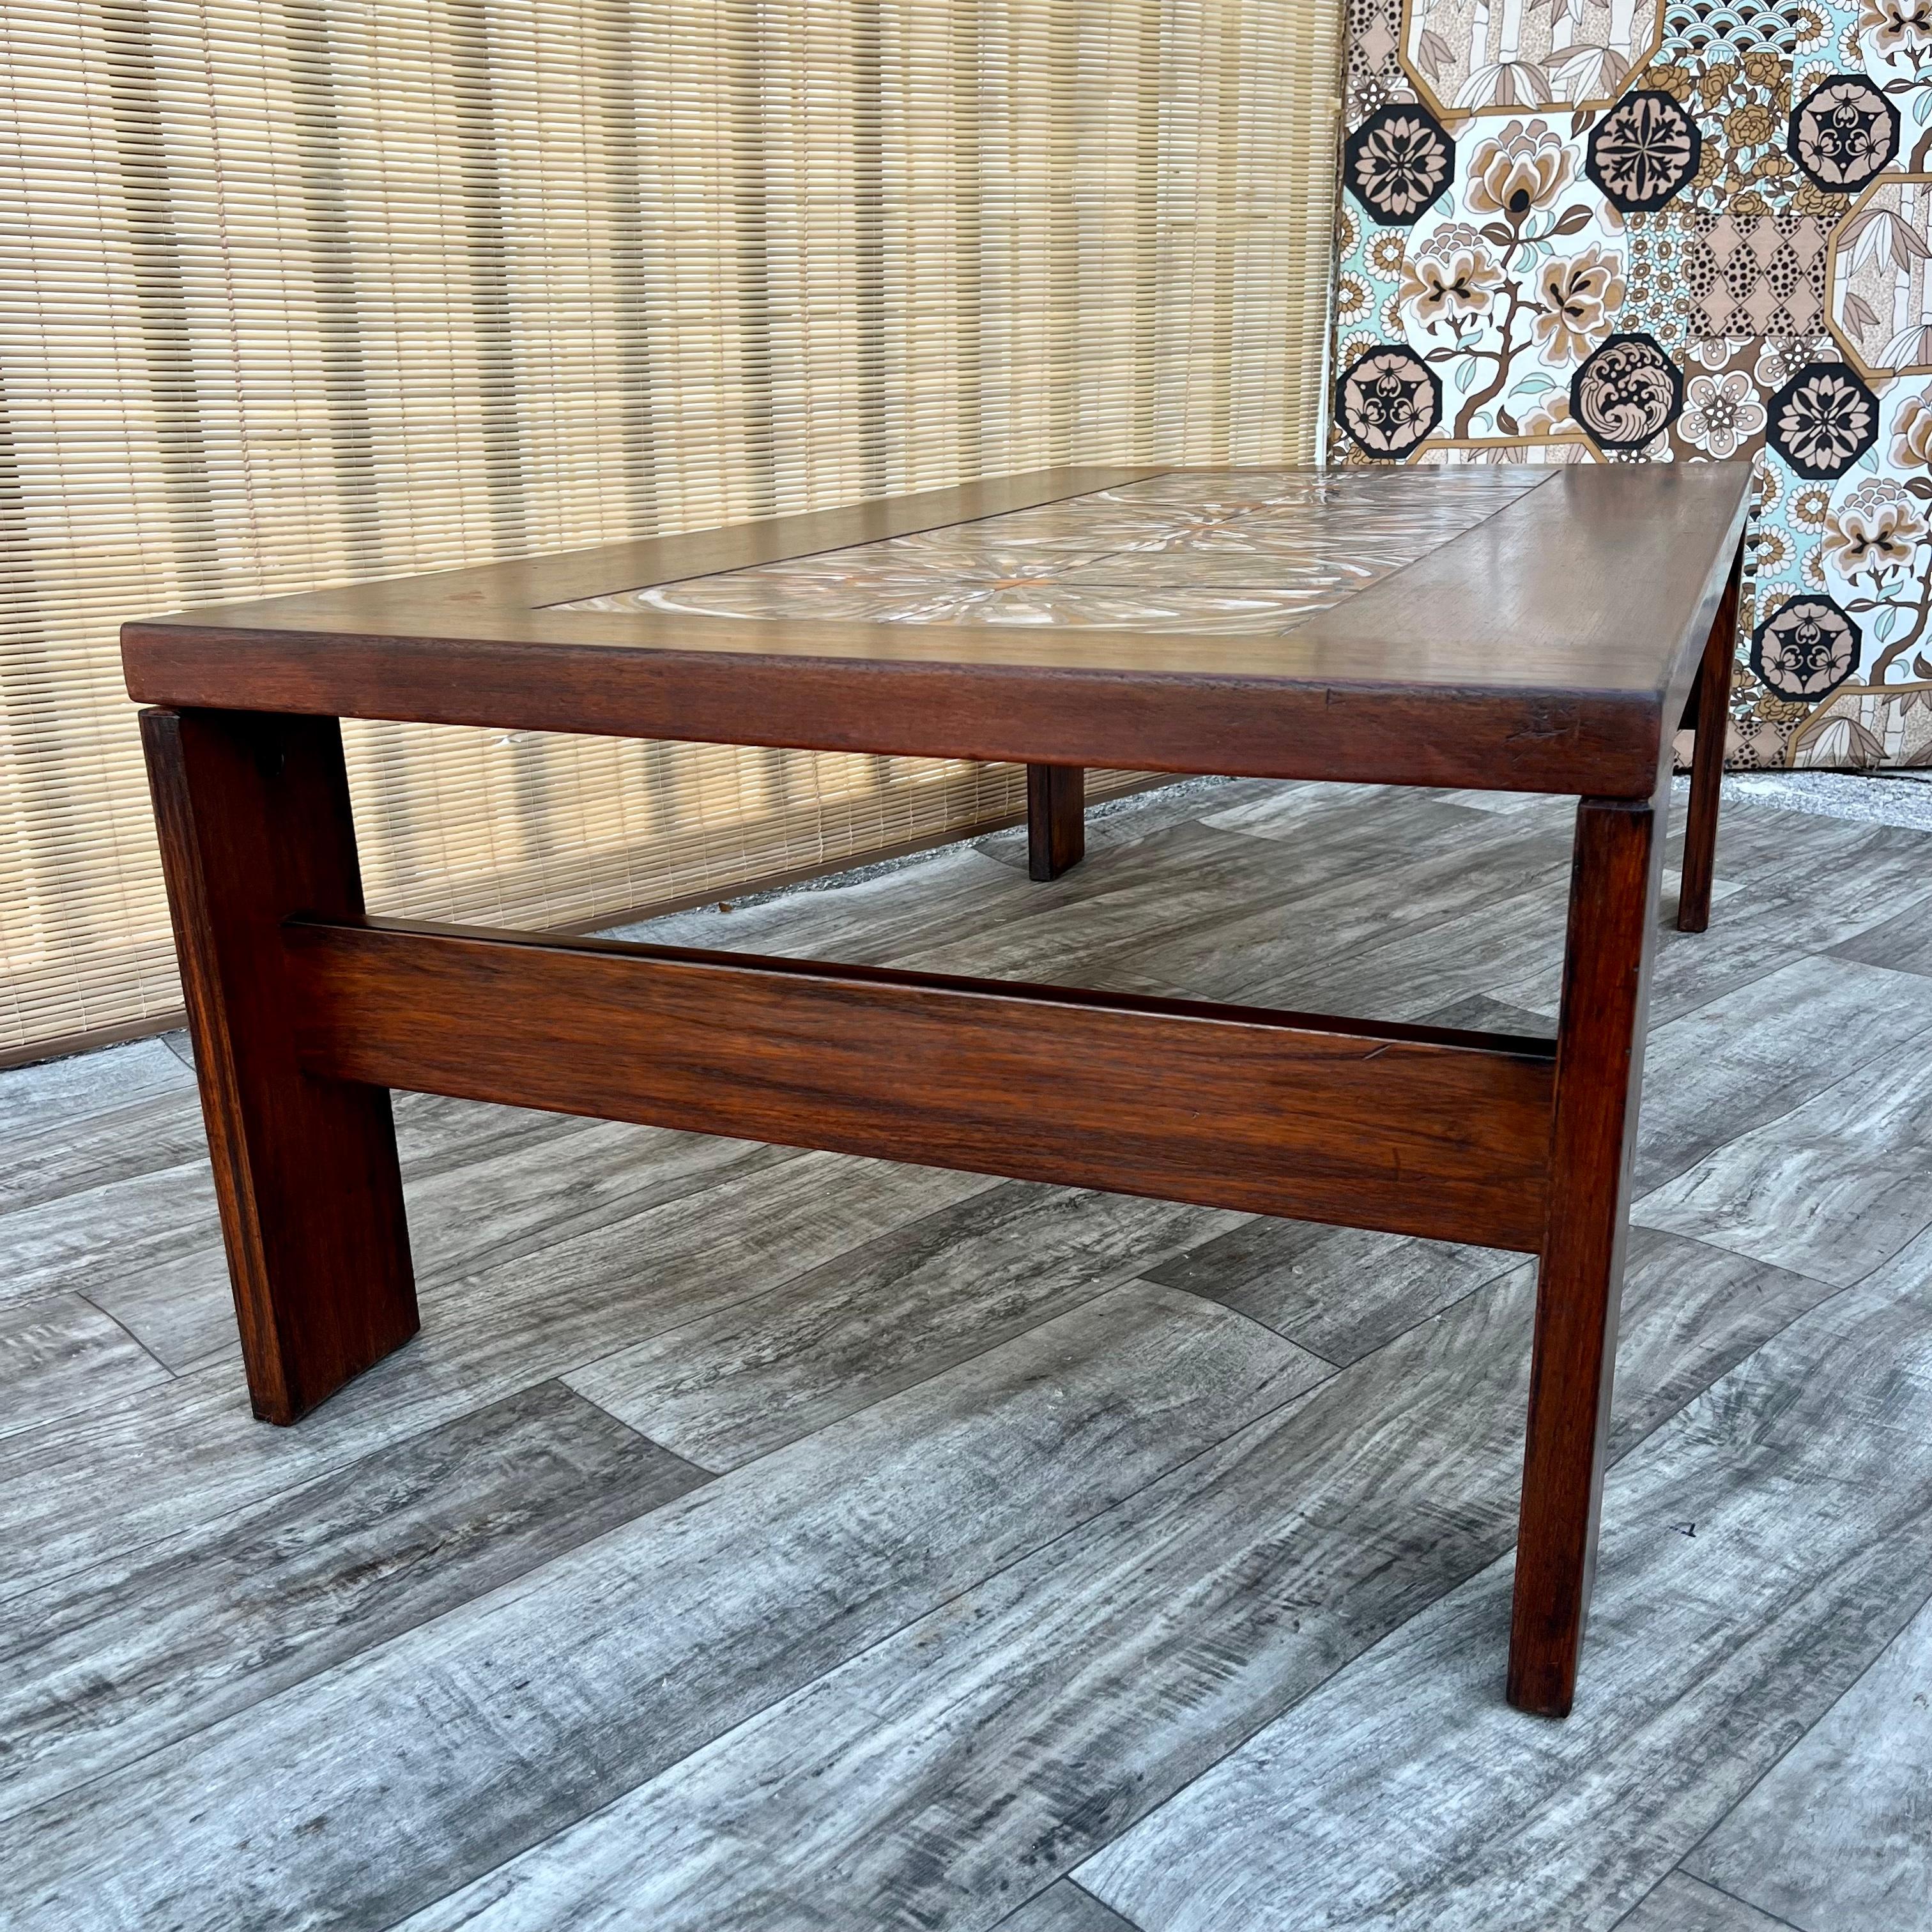 Danish Mid Century Modern Coffee Table With Ceramic Tile Inlays. Circa 1960s  For Sale 7